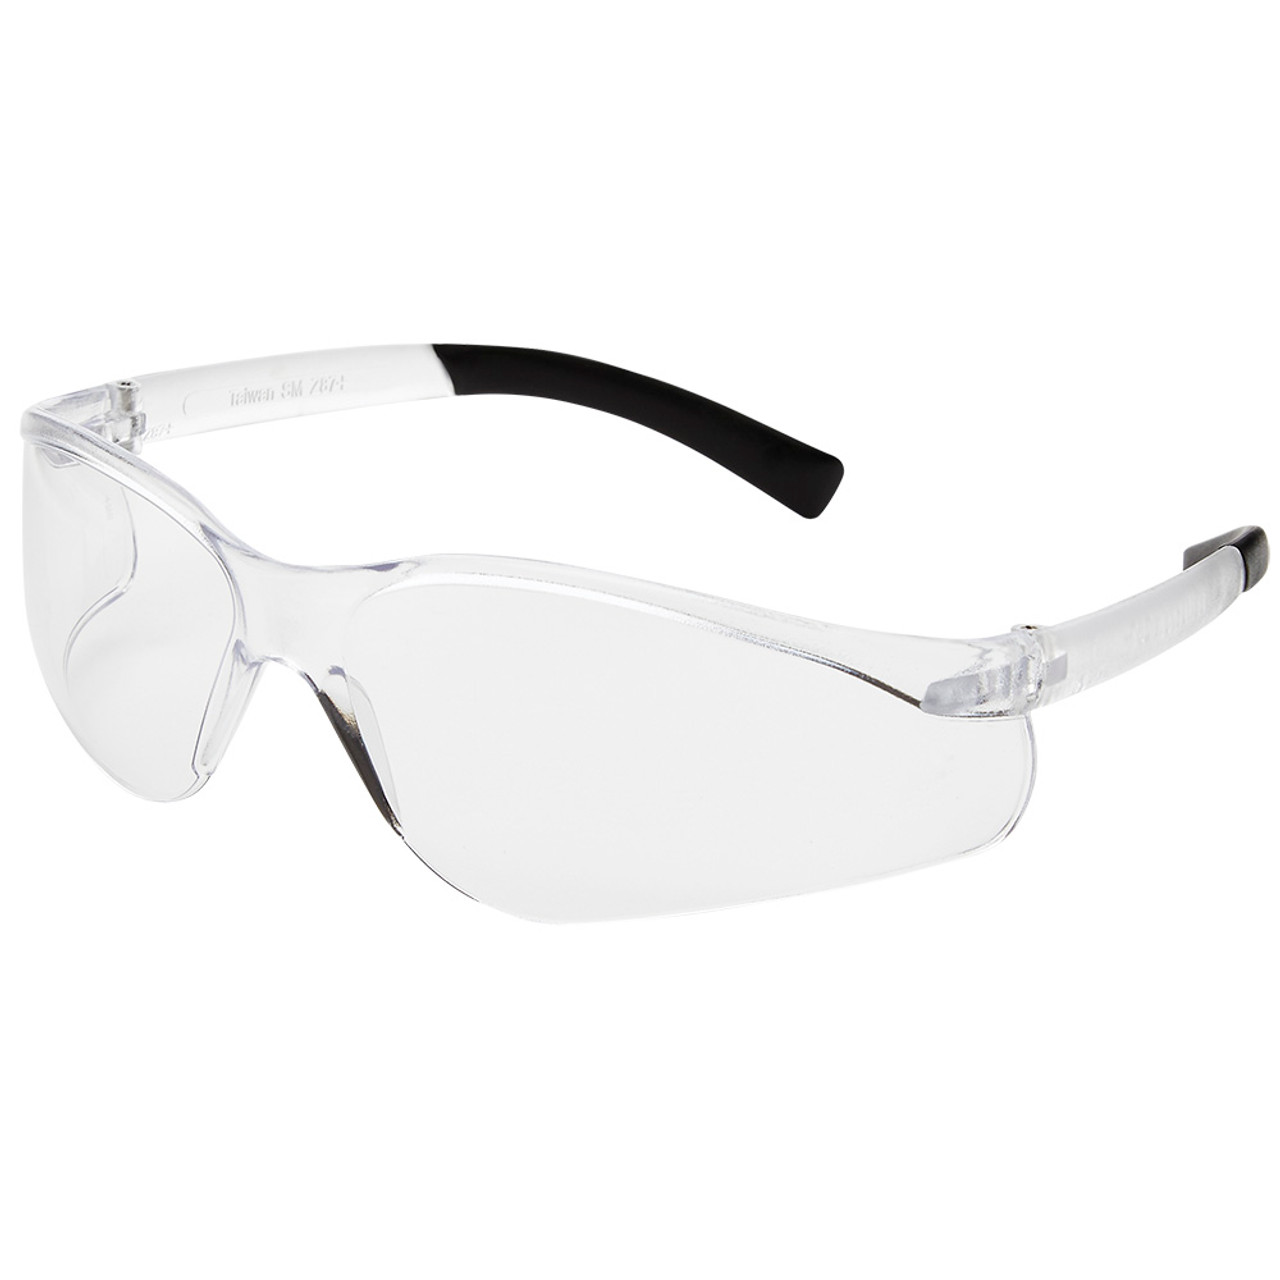 Sellstrom® X330 Series Anti-Fog Wrap Around Safety Glasses - Clear - Black Rubberized Arms  S73402